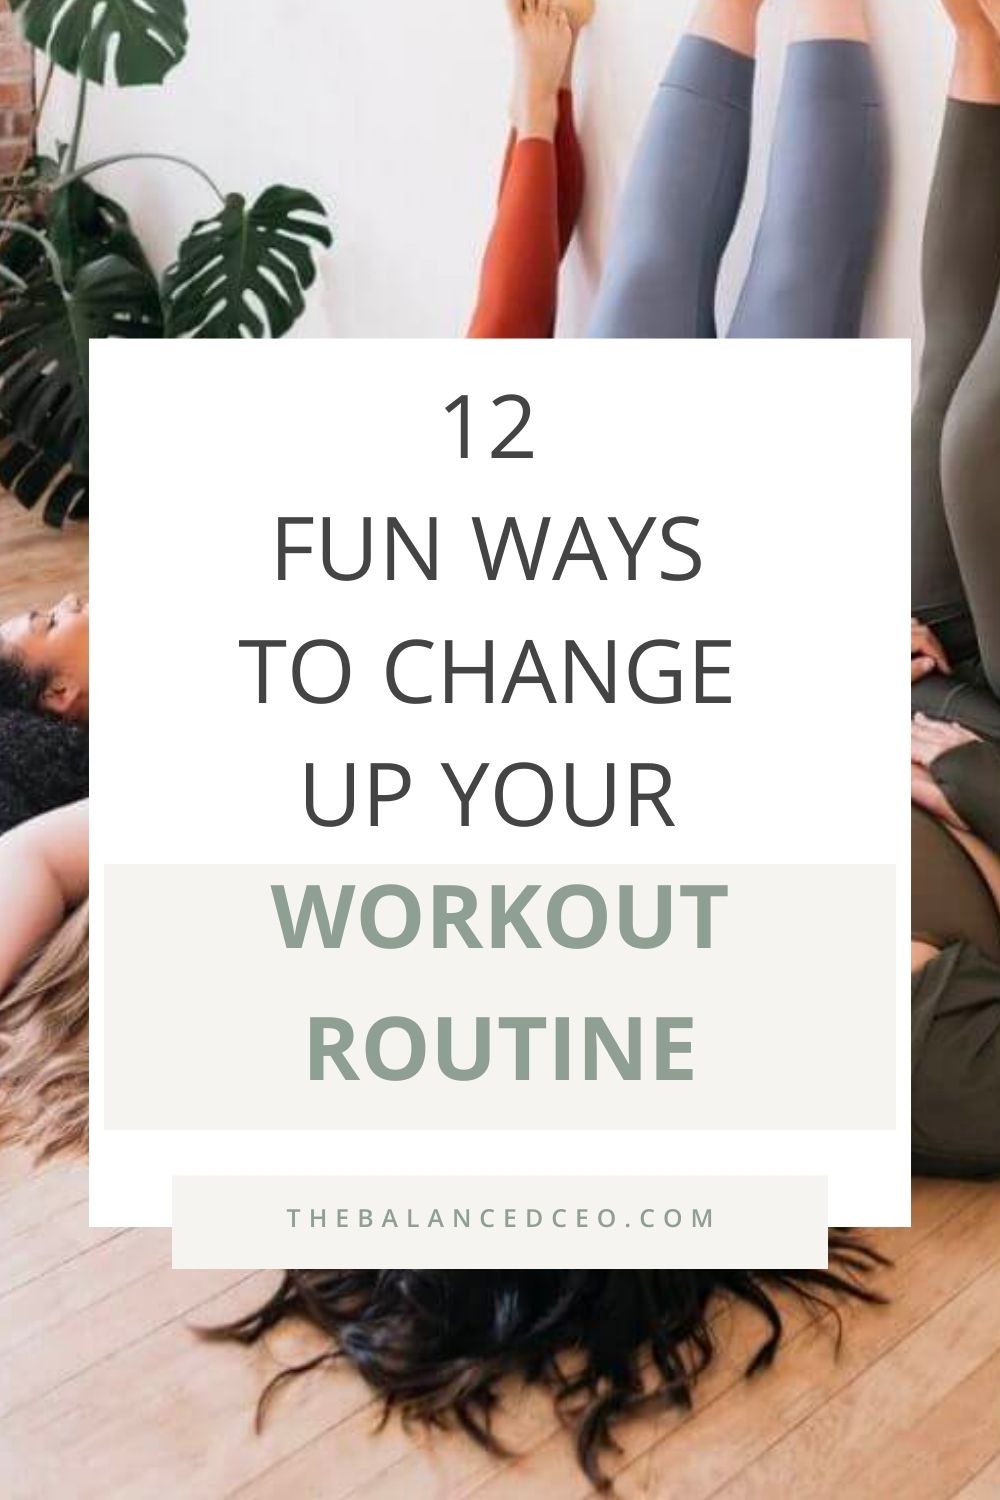 12 Fun Ways to Change Up Your Workout Routine